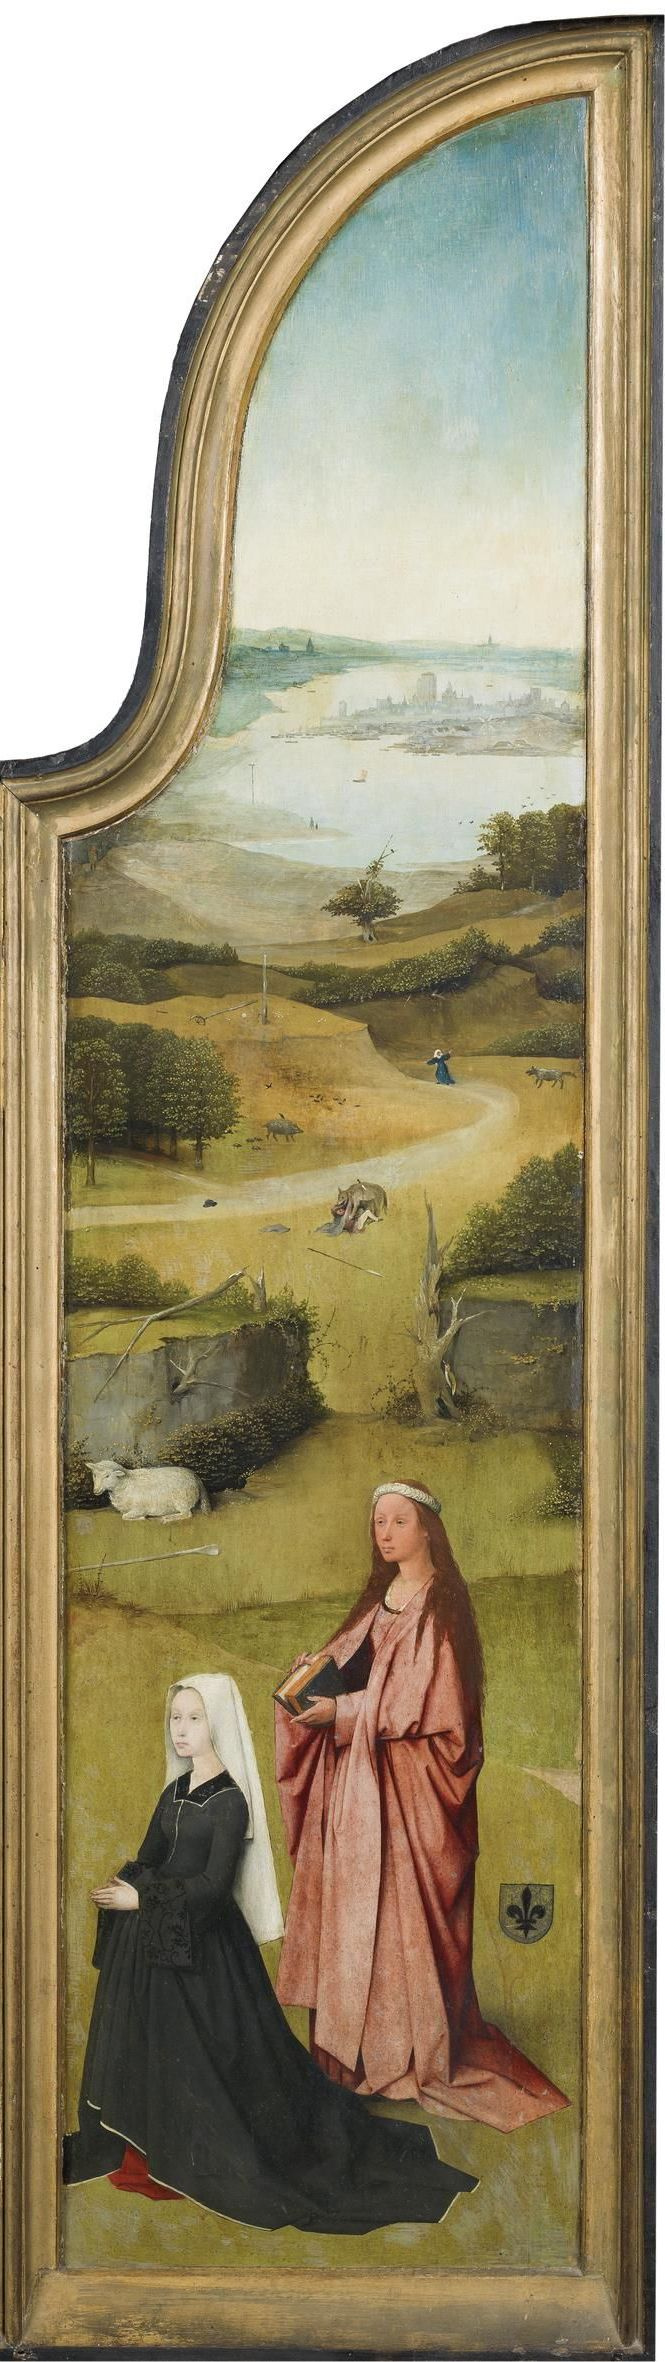 Hieronymus Bosch. Saint Agnes with the donor. Triptych the adoration of the Magi. Right wing